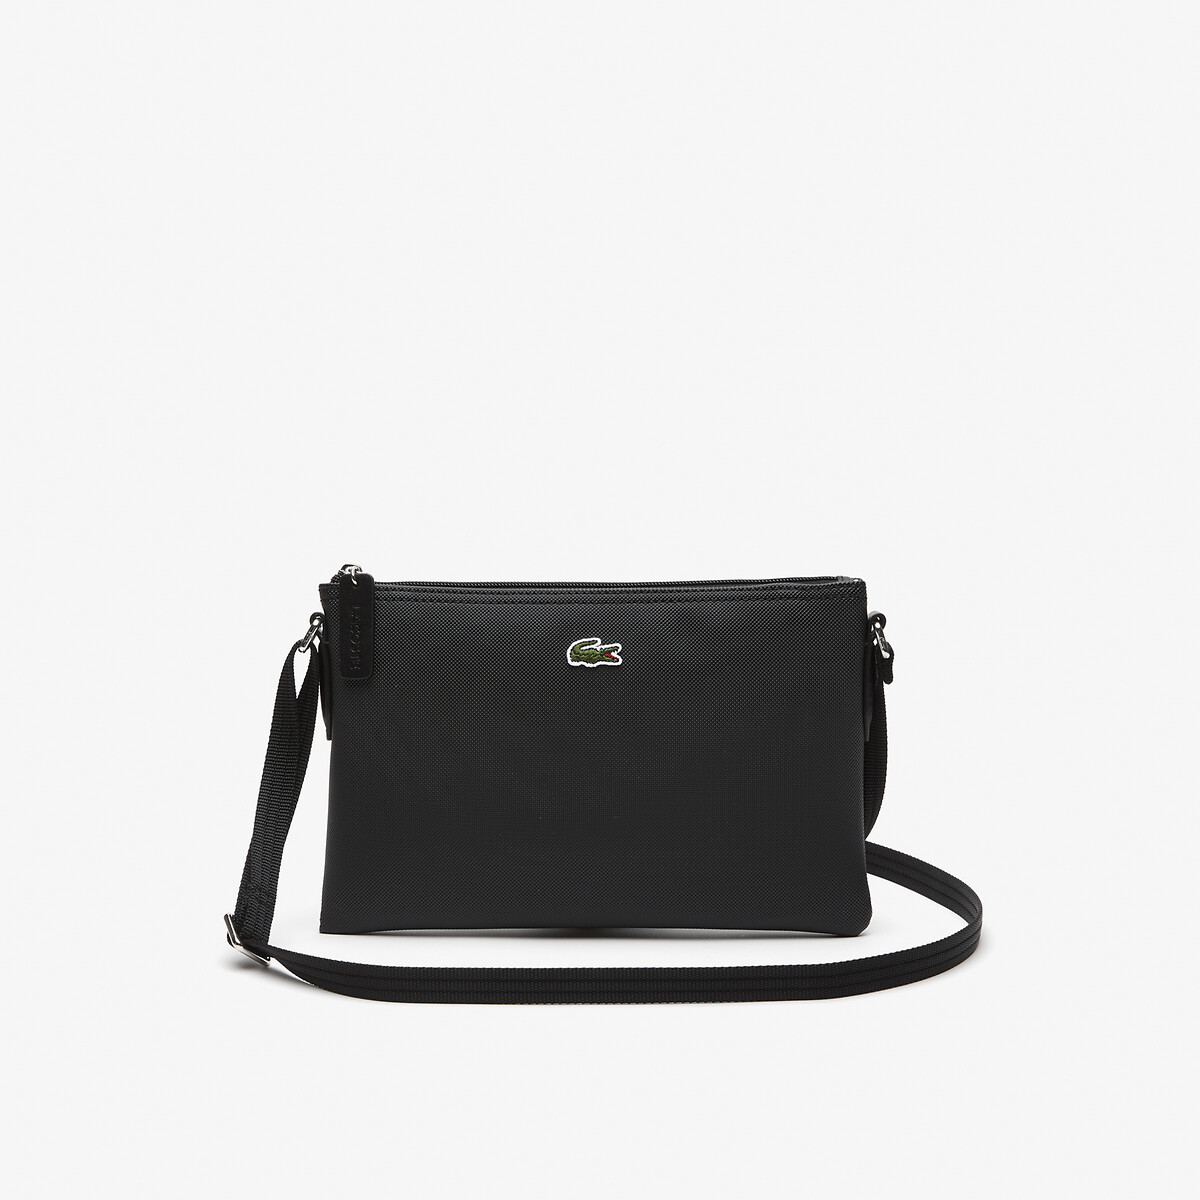 L1212 crossbody bag with embroidered logo, black, Lacoste